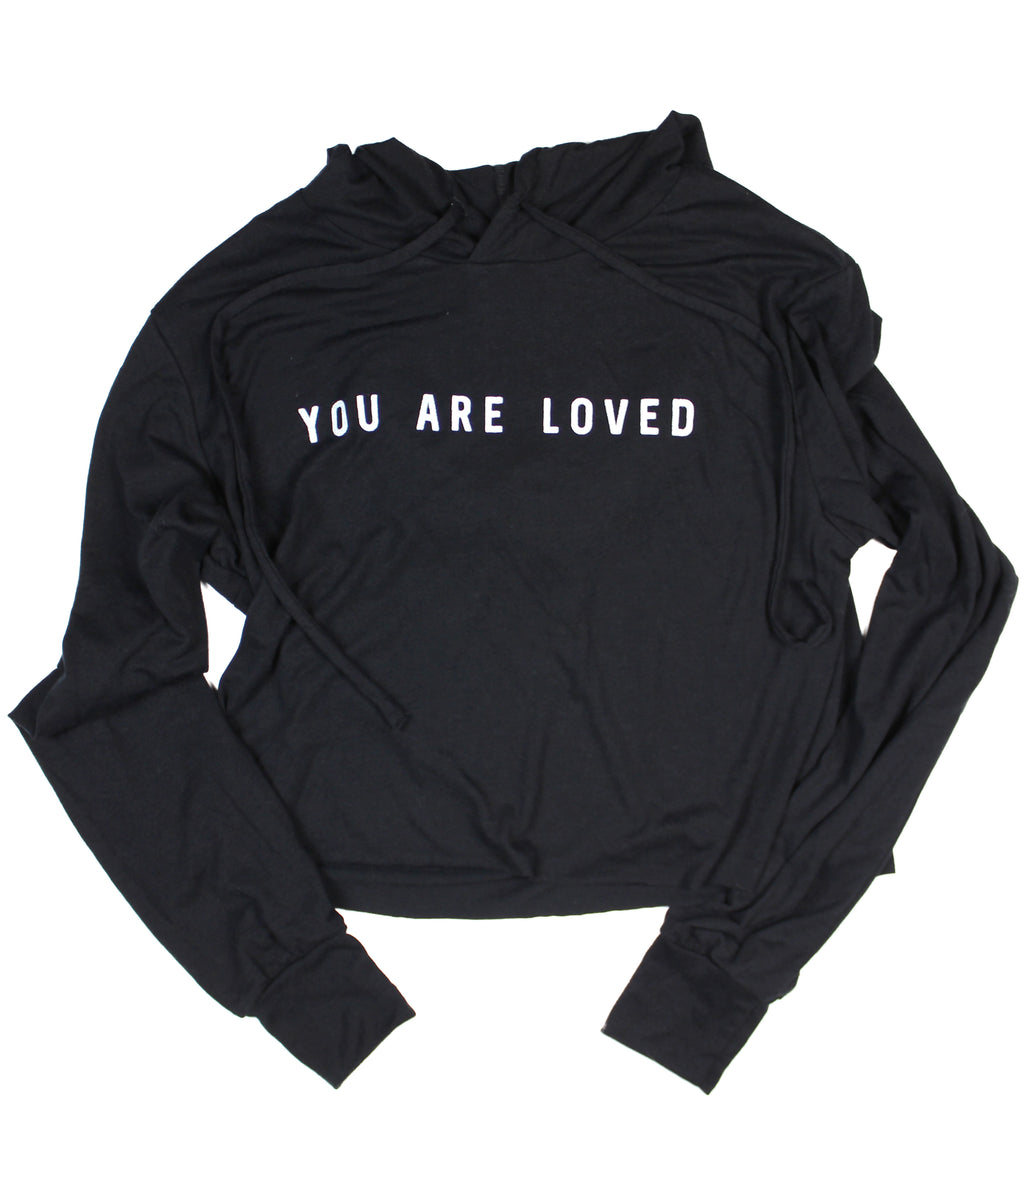 YOU ARE LOVED BLACK WOMEN'S CROPPED TRIBLEND HOODIE